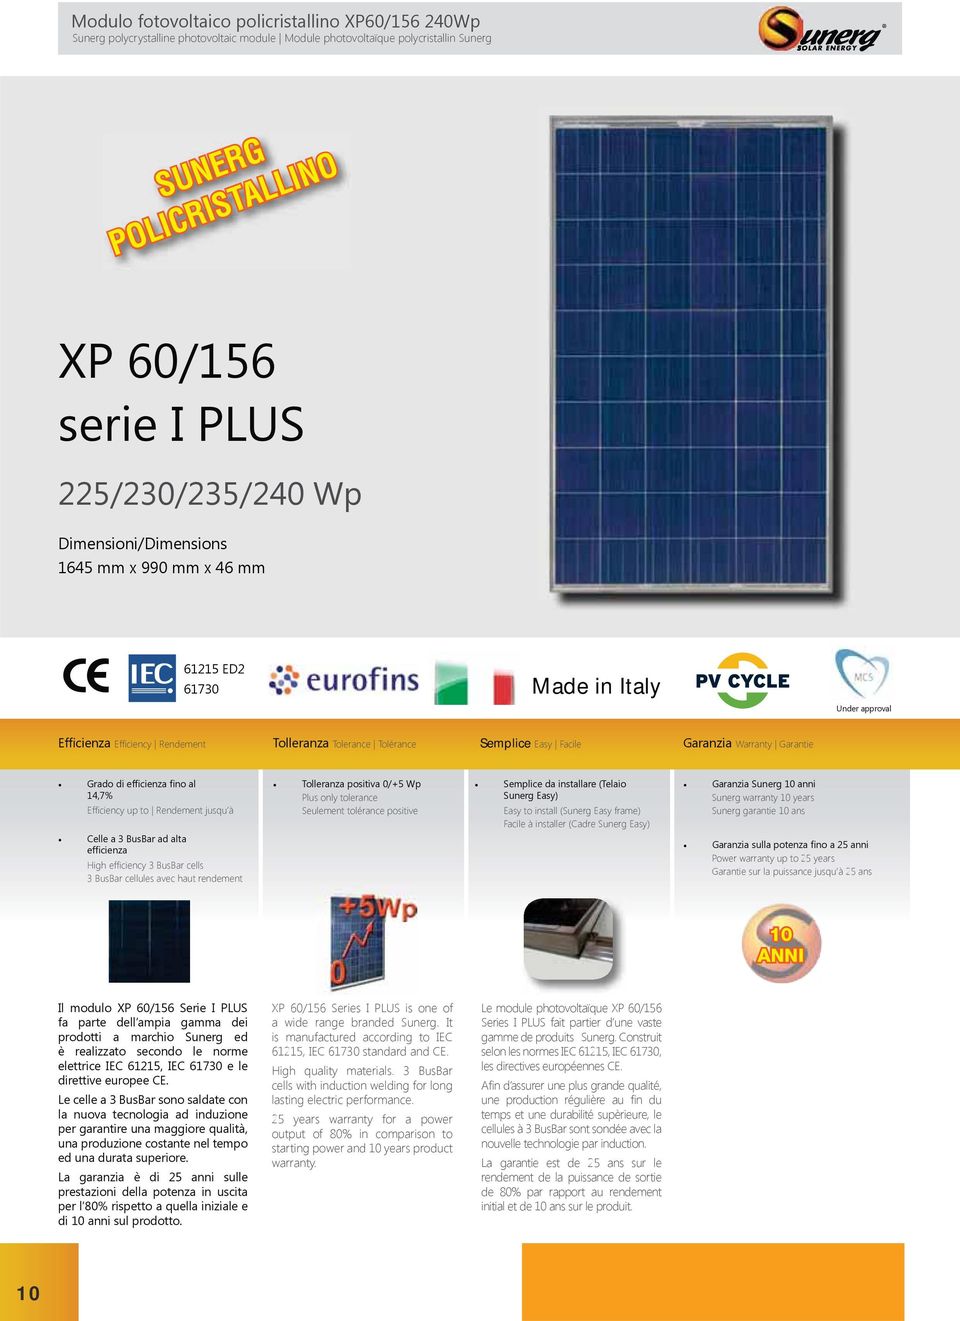 ans Power warranty up to 25 years 10 ANNI XP 60/156 Series I PLUS is one of a wide range branded Sunerg. It is manufactured according to IEC 61215, IEC 61730 standard and CE. High quality materials.